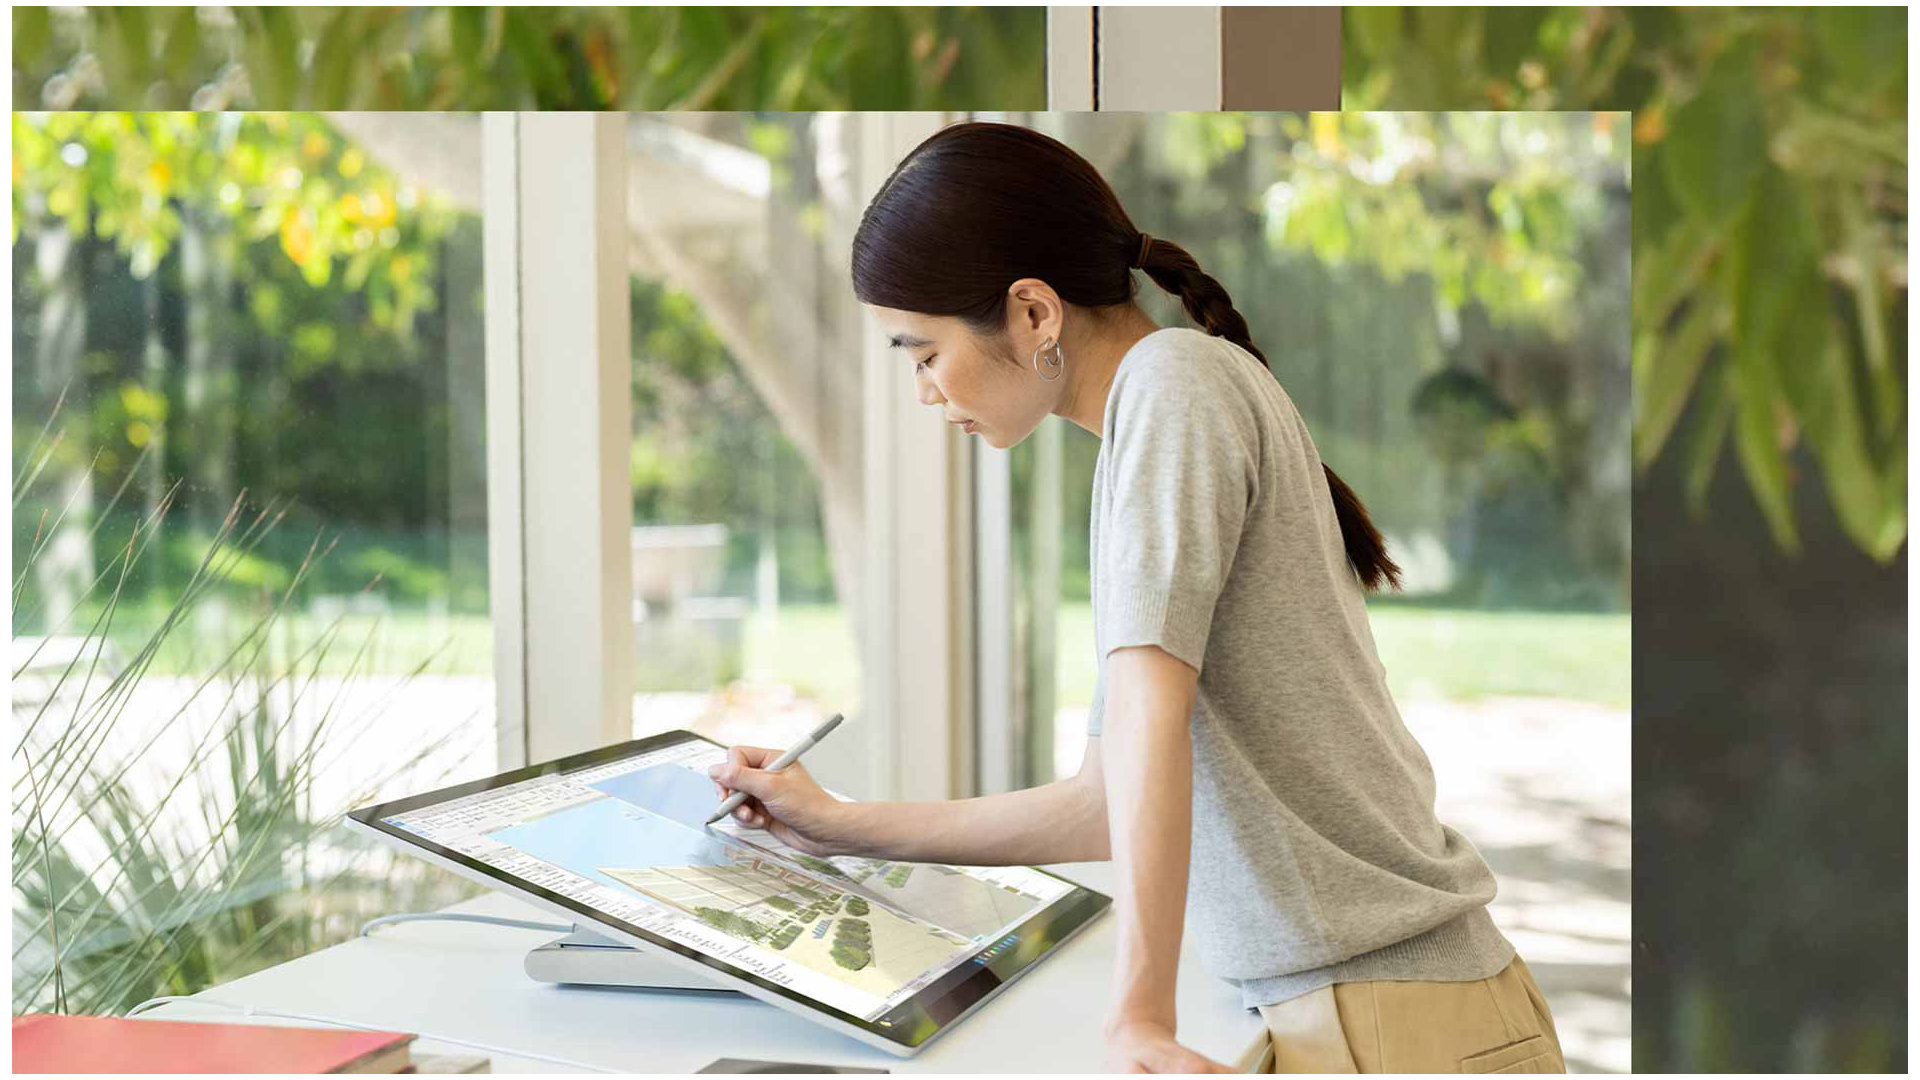 A person uses Surface Pen to ink on the screen of a Surface Studio 2+ in a home office setting